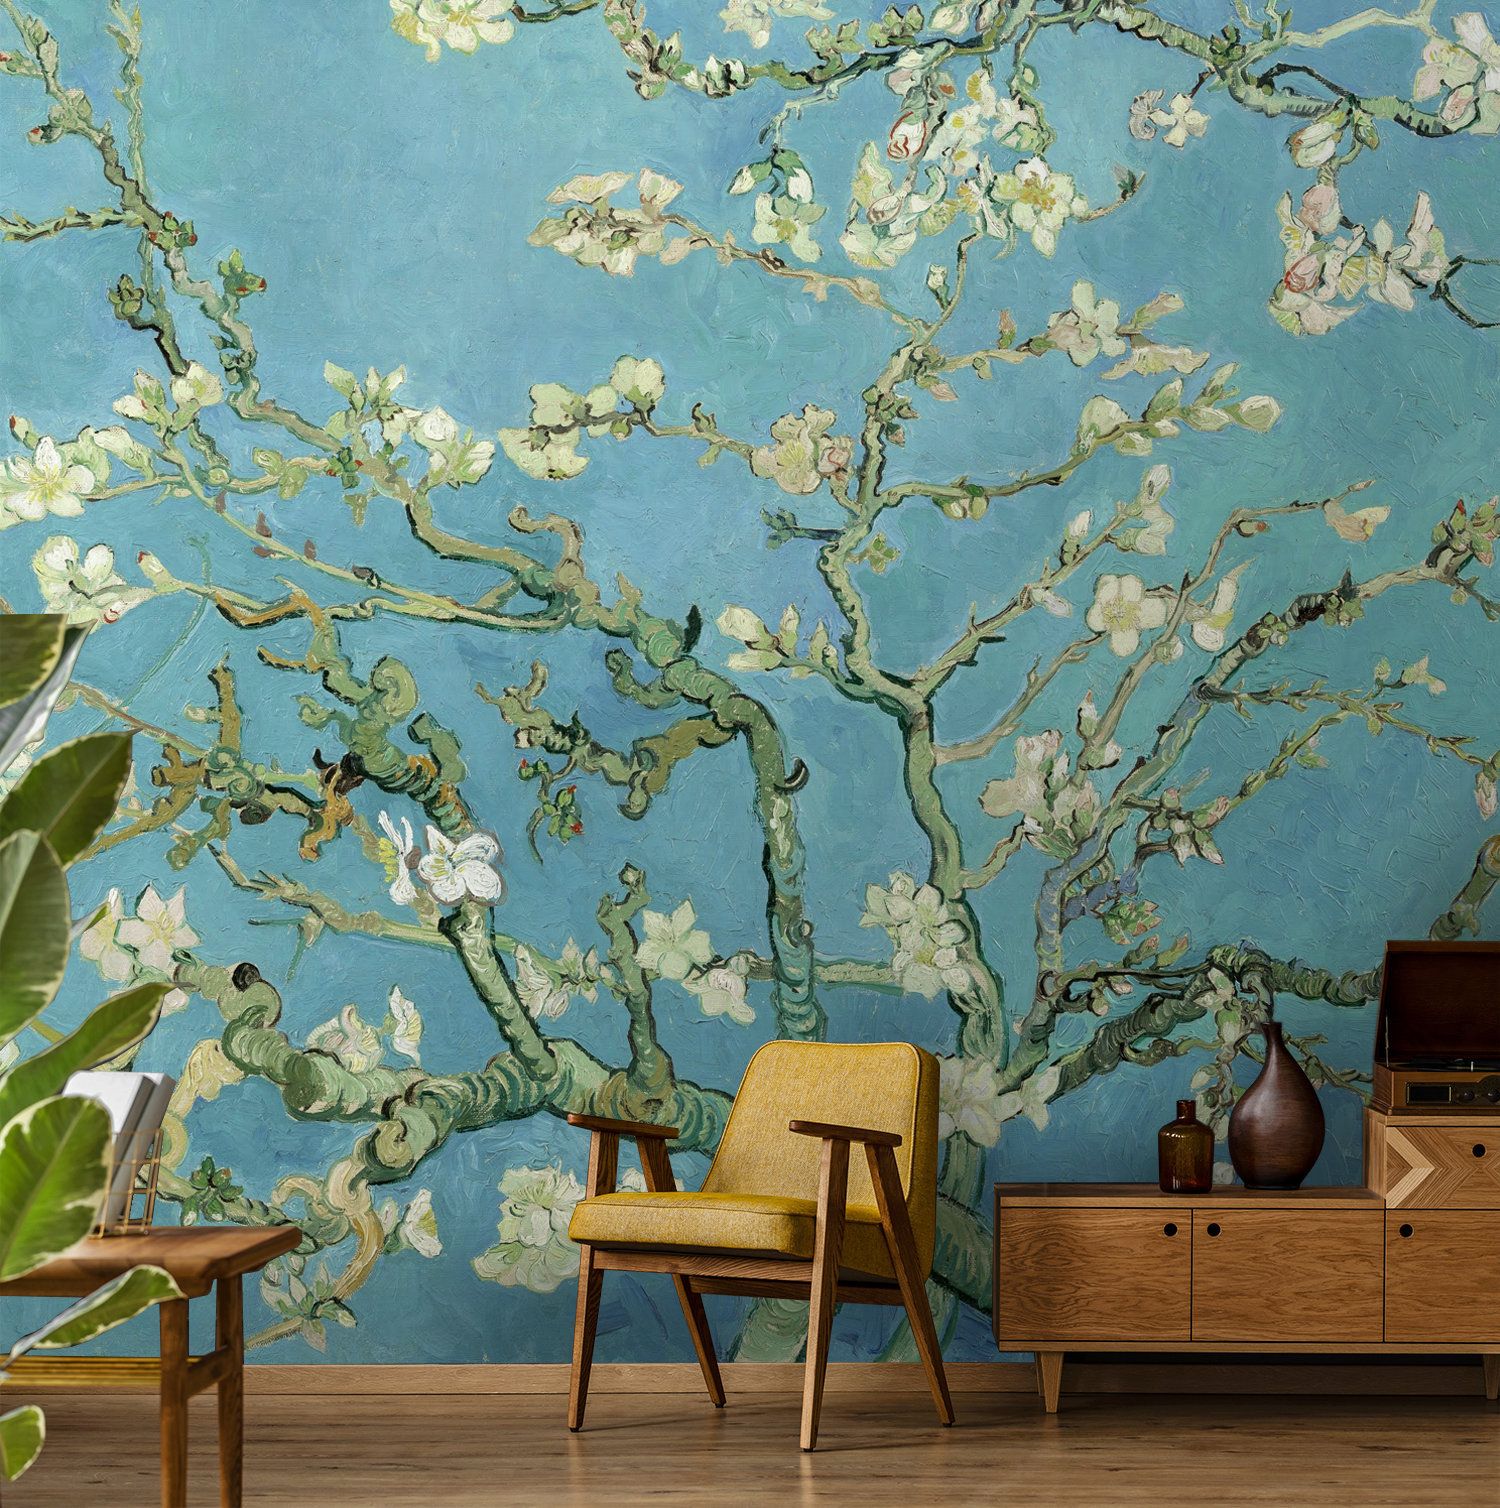 Almond Blossomvan Gogh Wallpaper Peel And Stick Vintage – Etsy Throughout Almond Blossoms Wall Art (View 7 of 15)